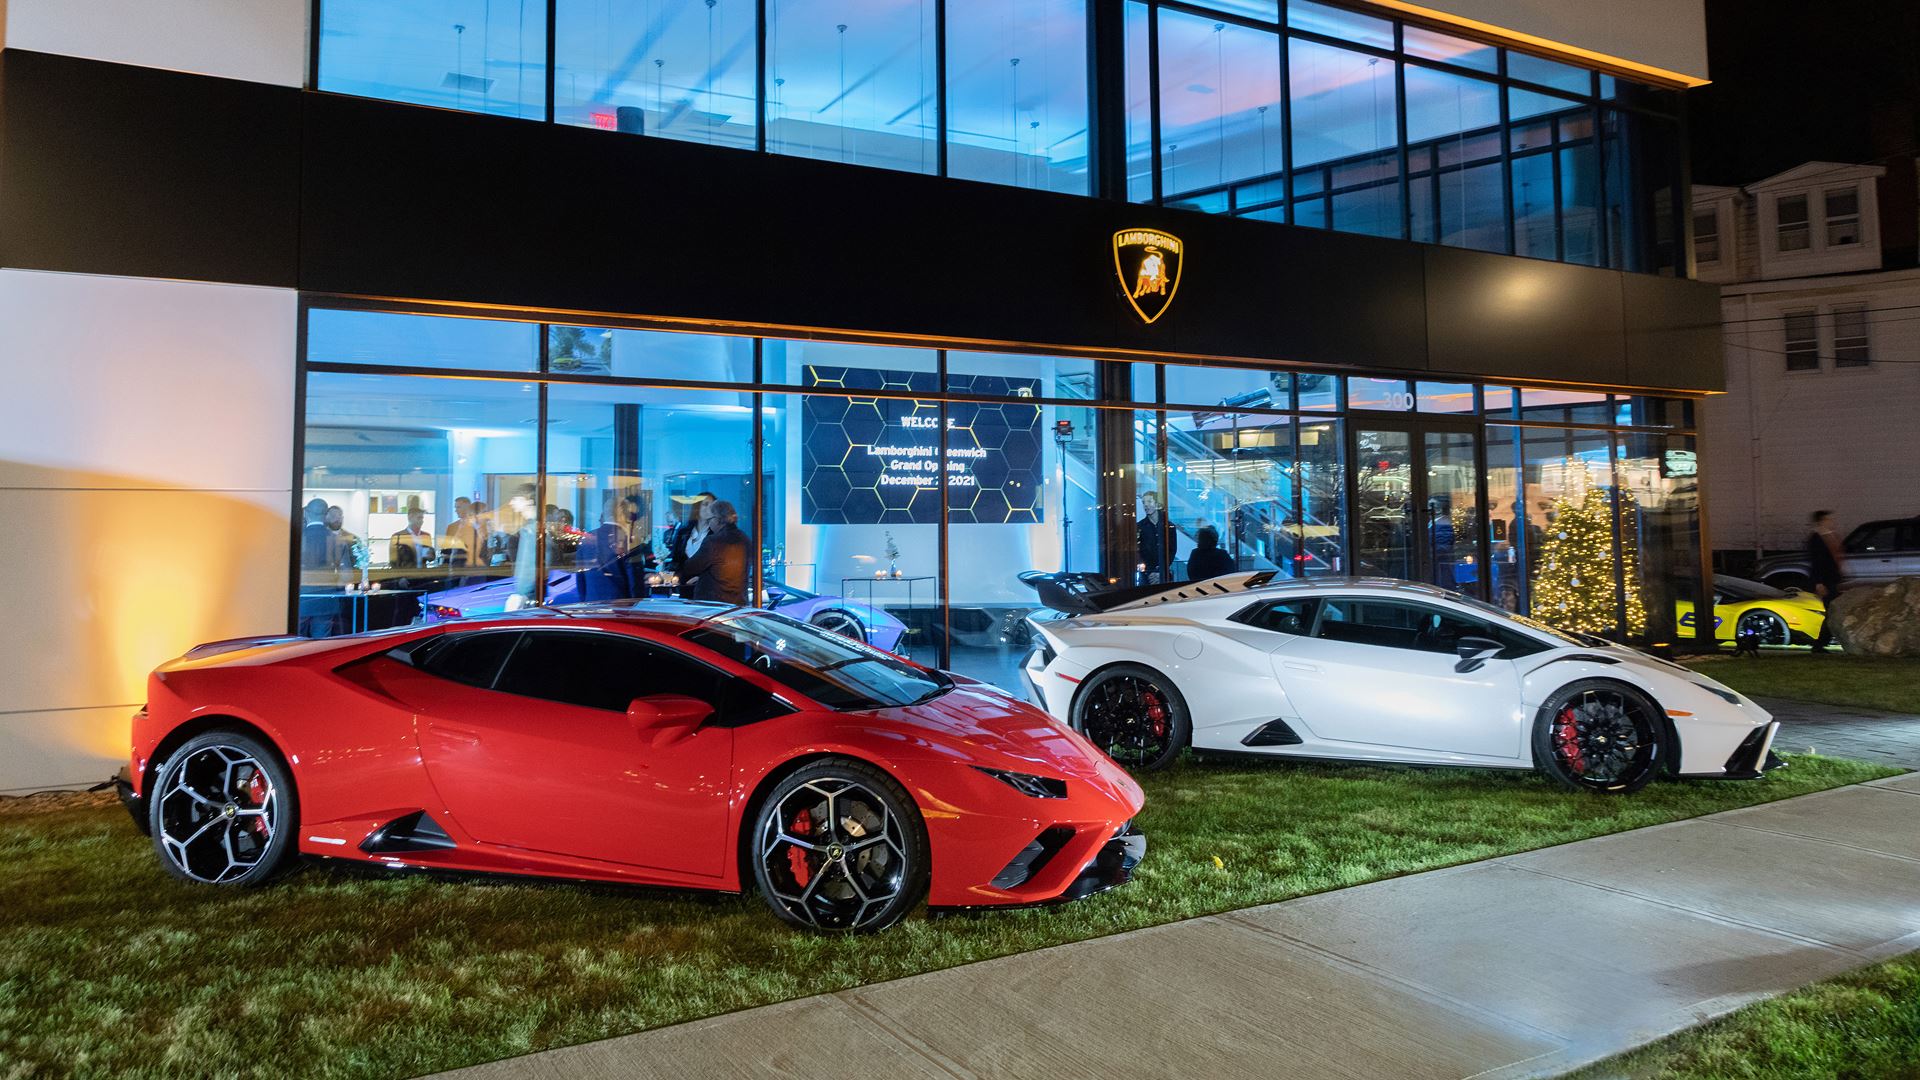 Lamborghini Expands Retail Footprint in US with New Showroom in Greenwich, CT - Image 2